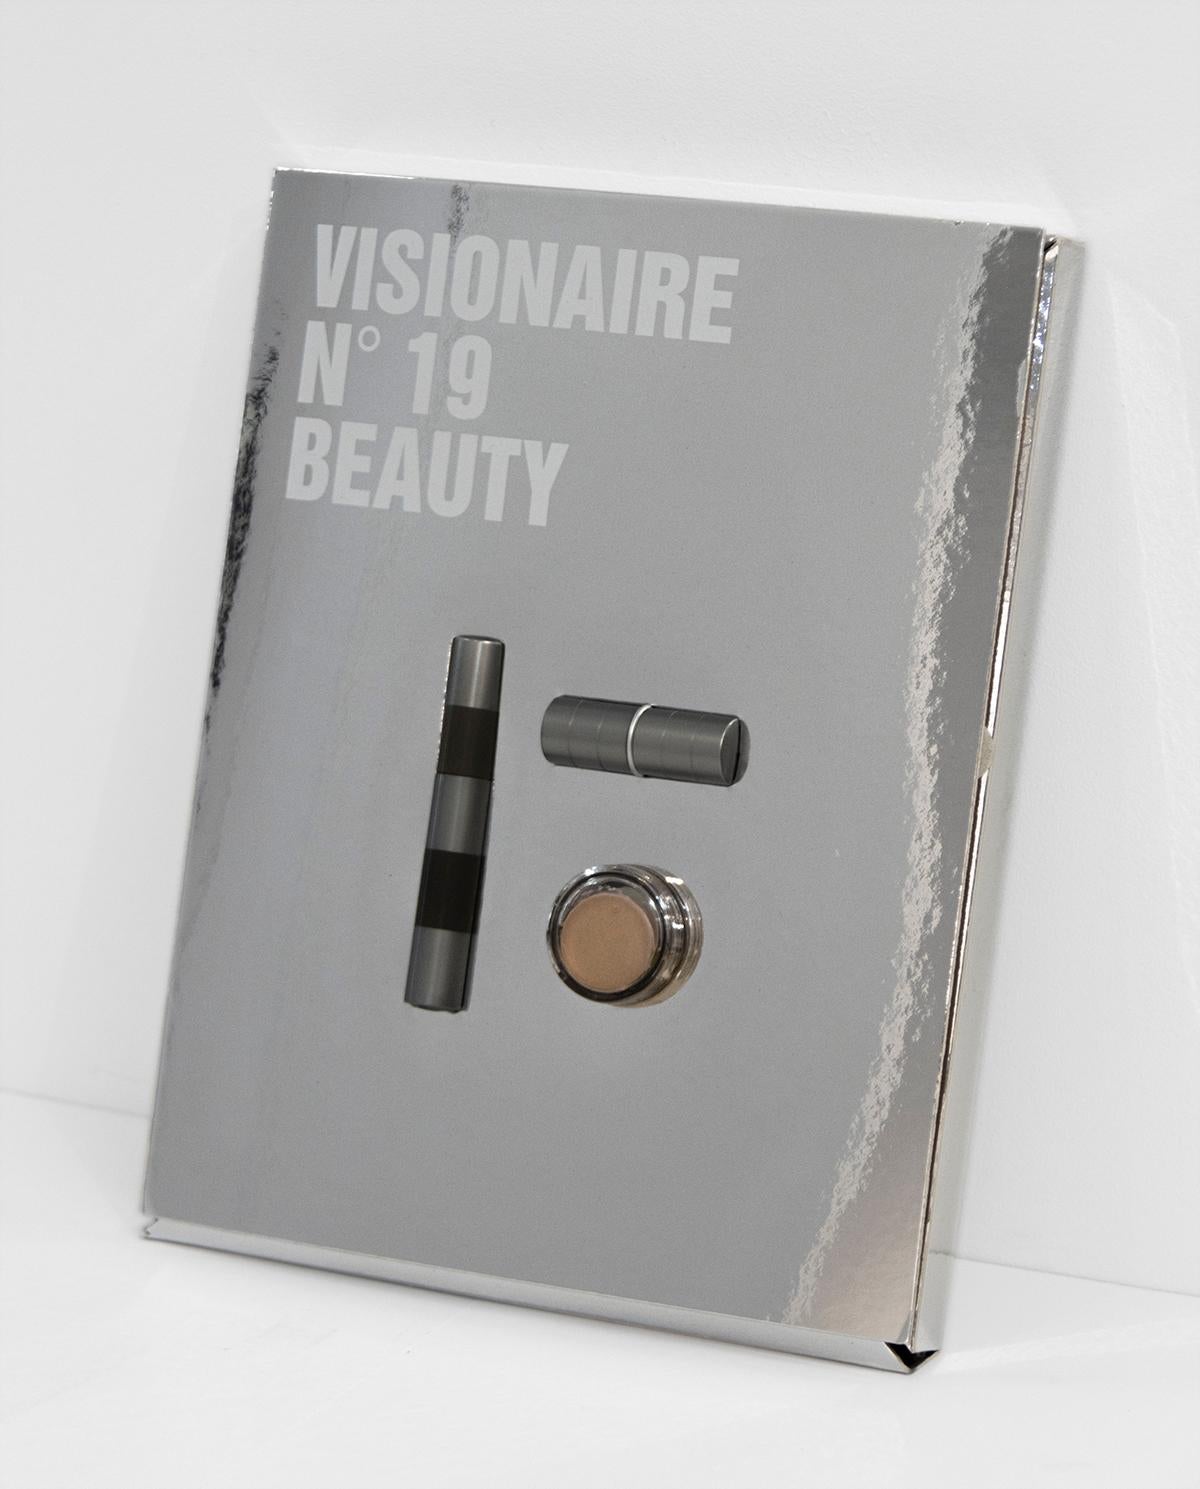 Visionaire 19: Beauty - Art by Visionaire (Various Artists)